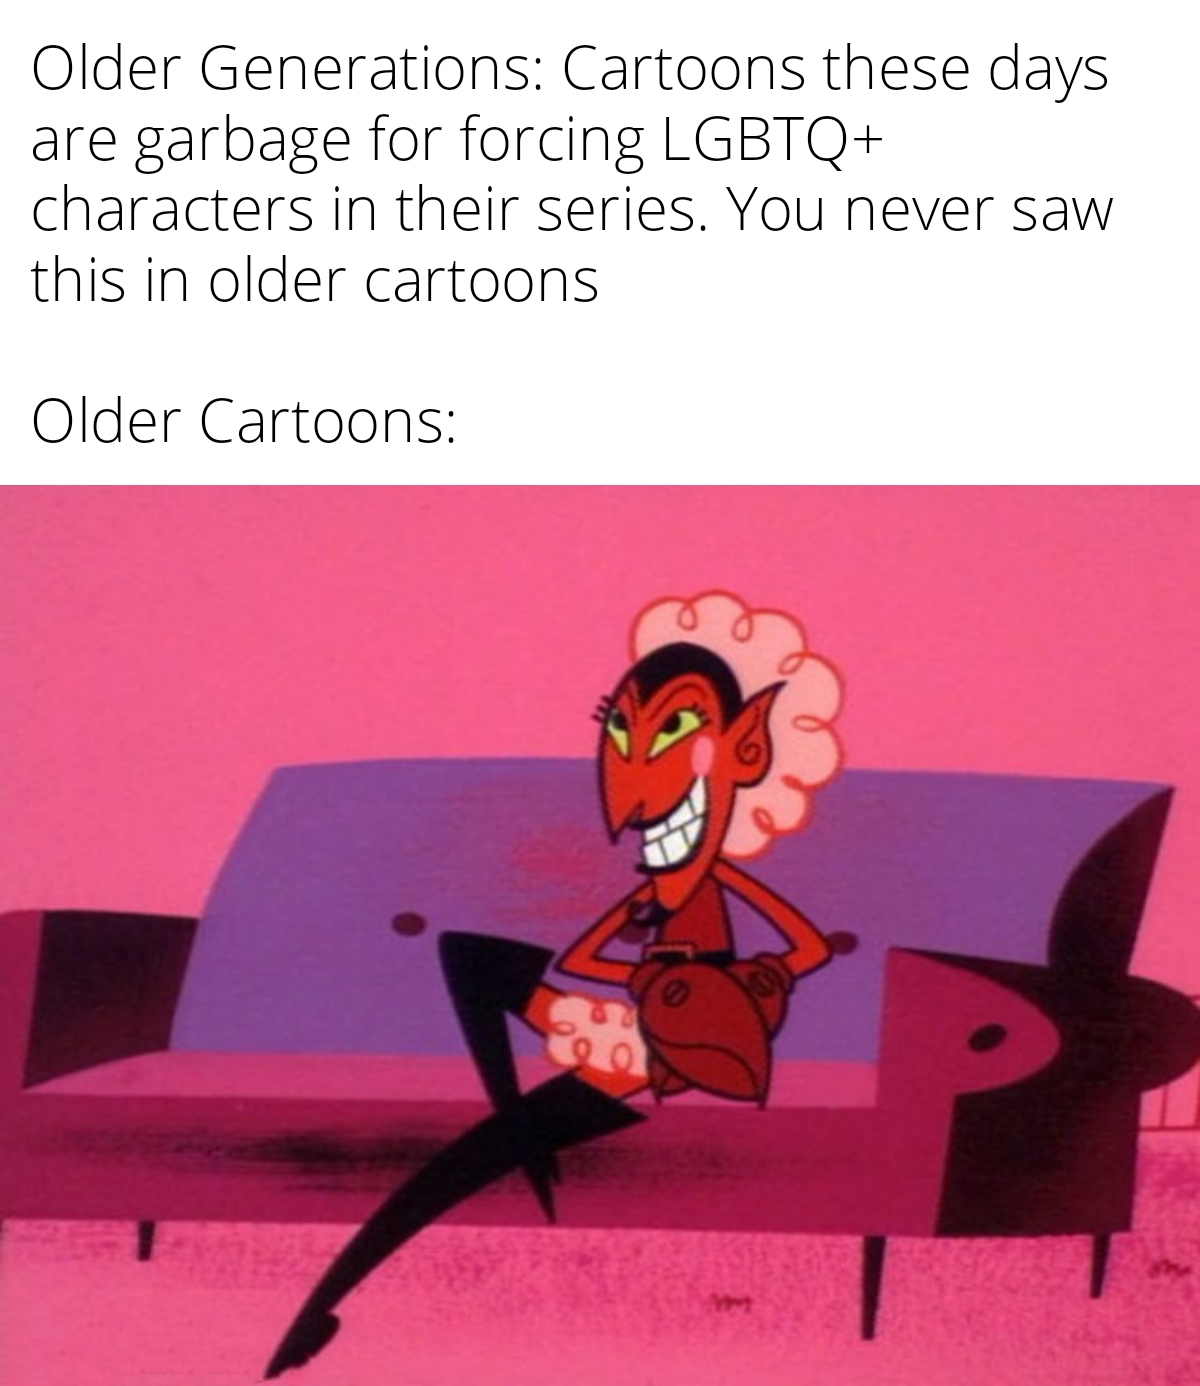 powerpuff girls red villain - Older Generations Cartoons these days are garbage for forcing Lgbtq characters in their series. You never saw this in older cartoons Older Cartoons